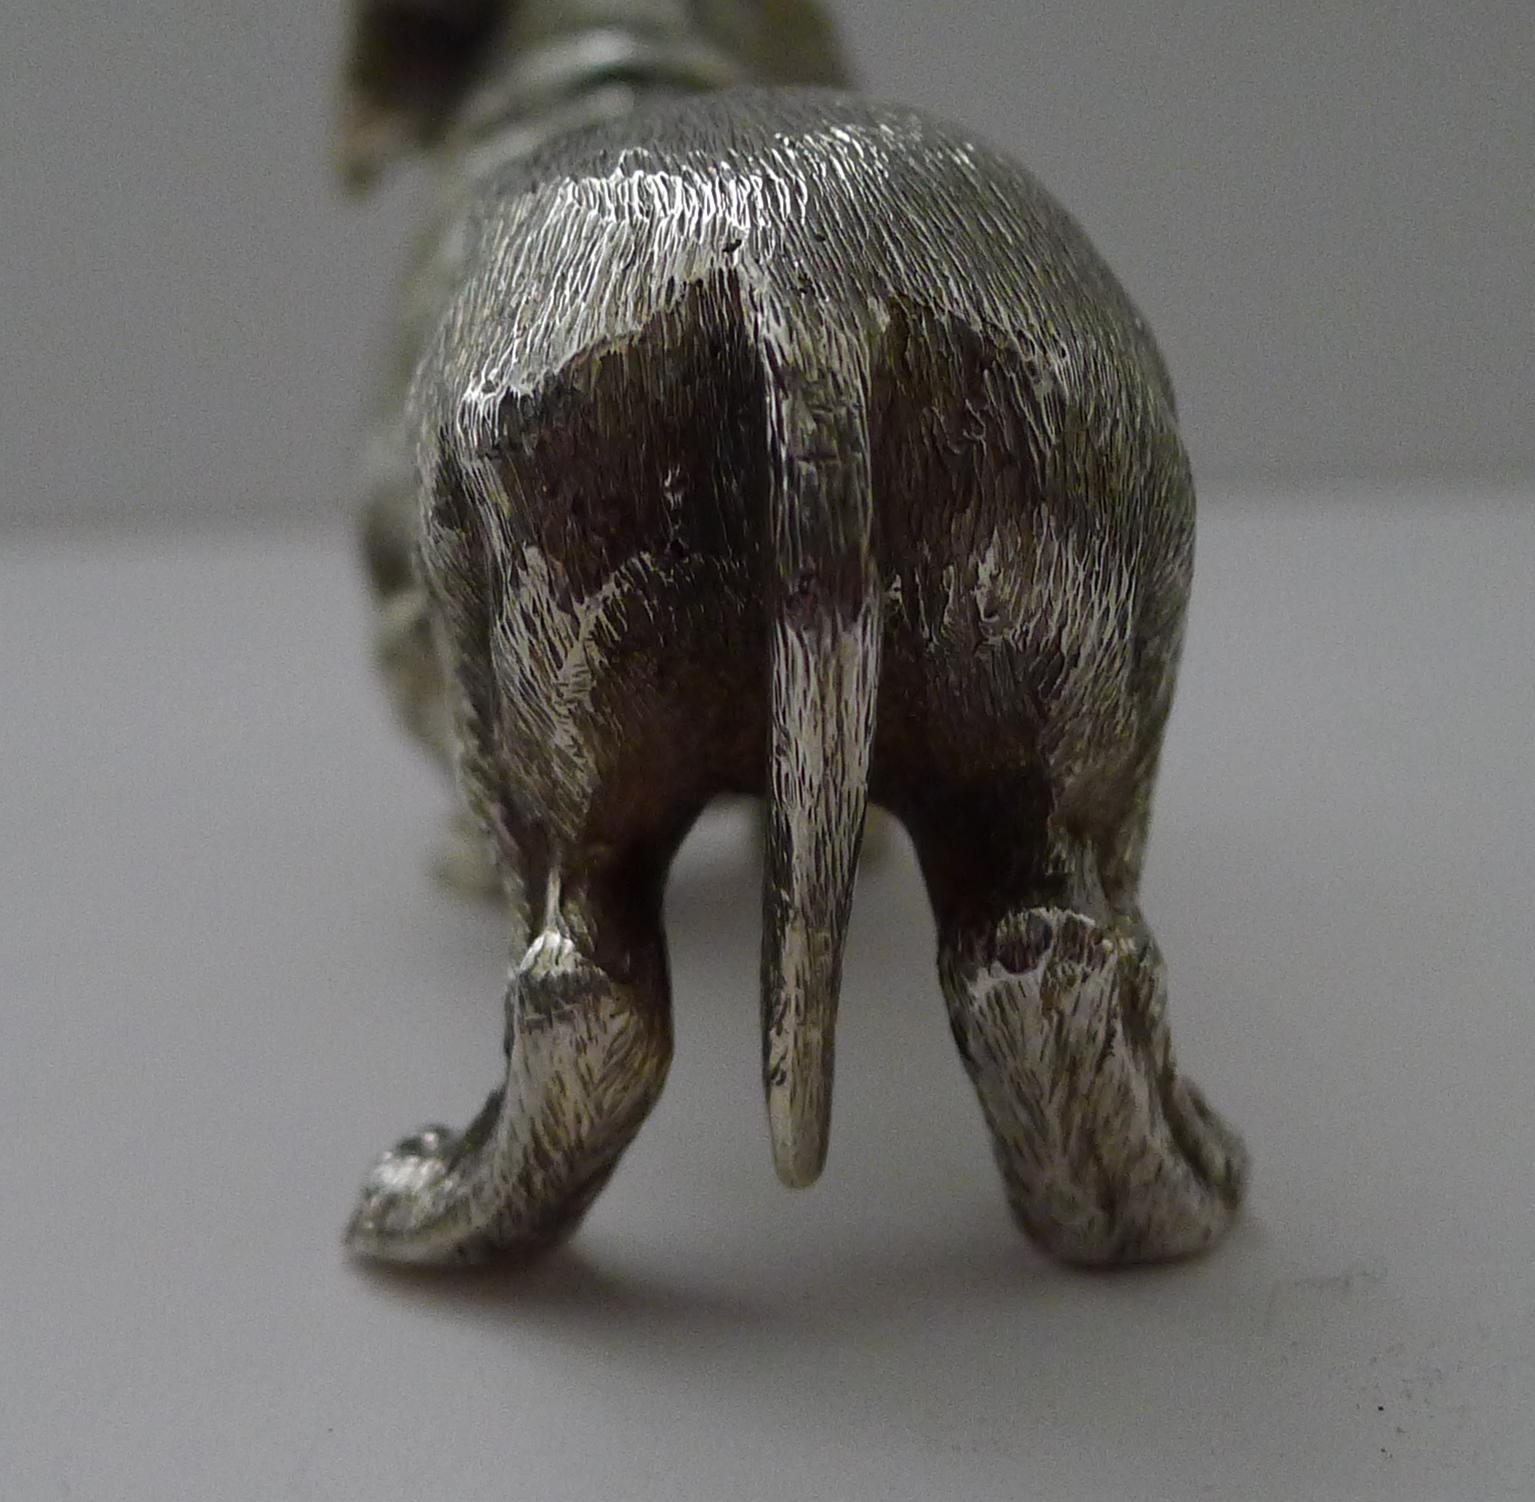 A magnificent solid cast (not filled) English silver model of a Dachshund, beautifully executed and one of the most sought-after castings by SMD castings, London.

The underside is fully hallmarked for London 1975 together with the makers mark